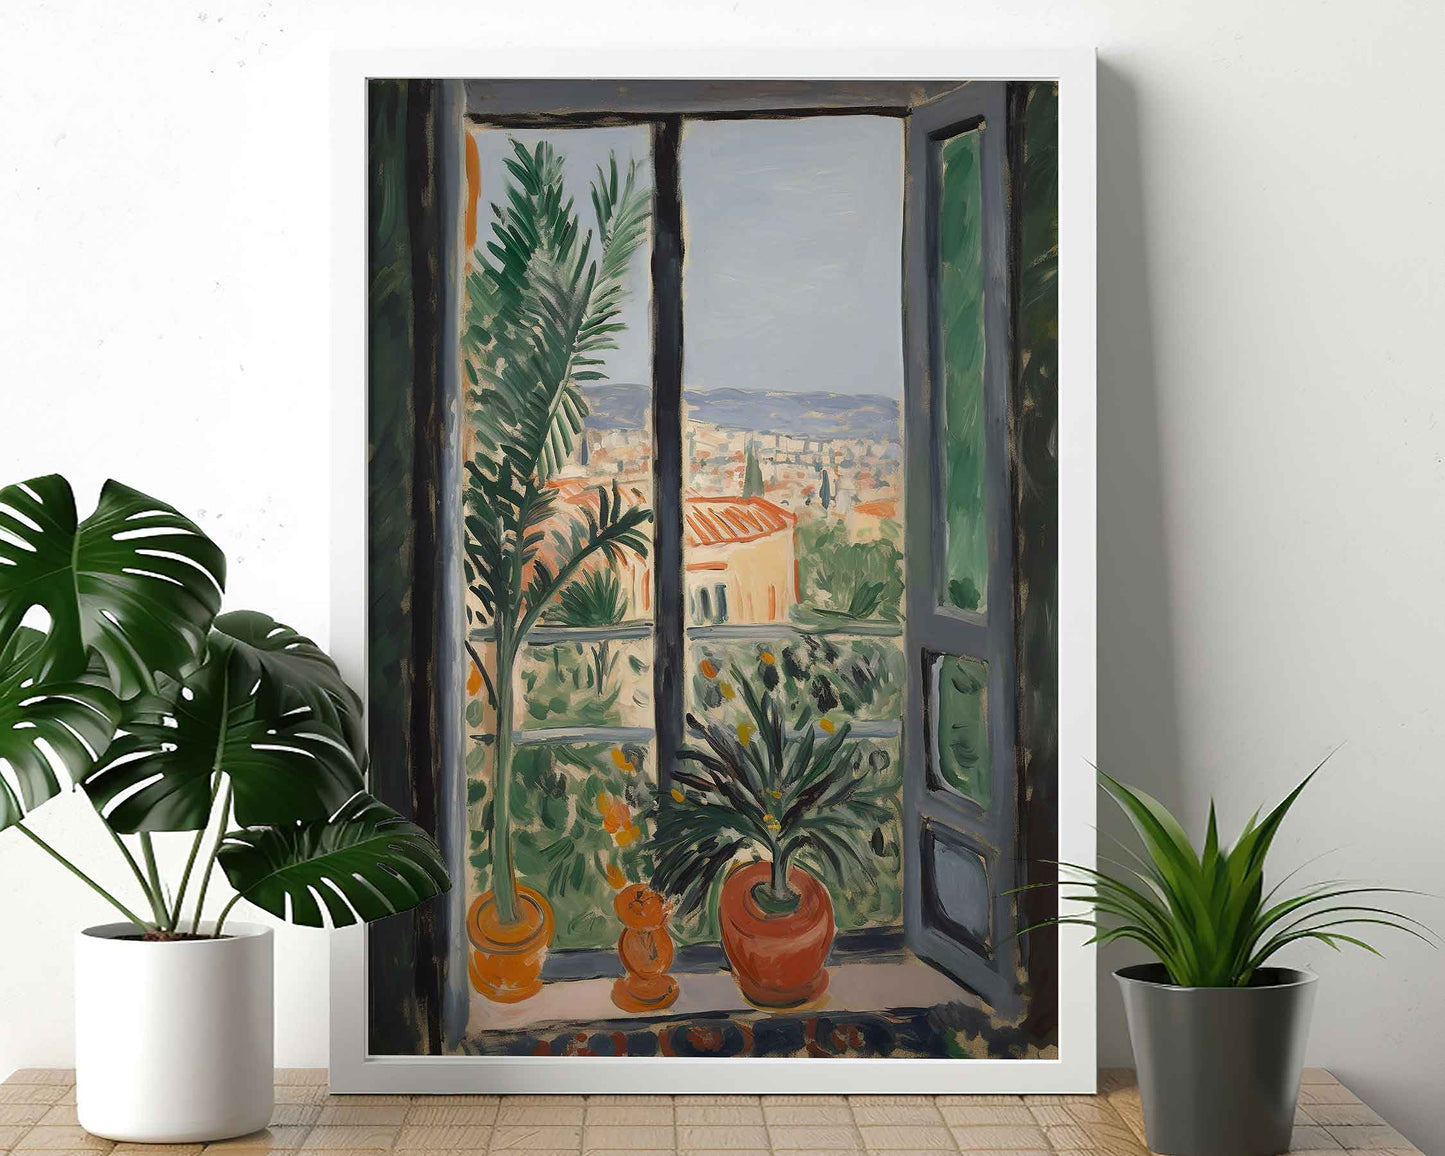 Framed Image of Matisse Style Wall Art Prints Garden & Window Oil Paintings Posters